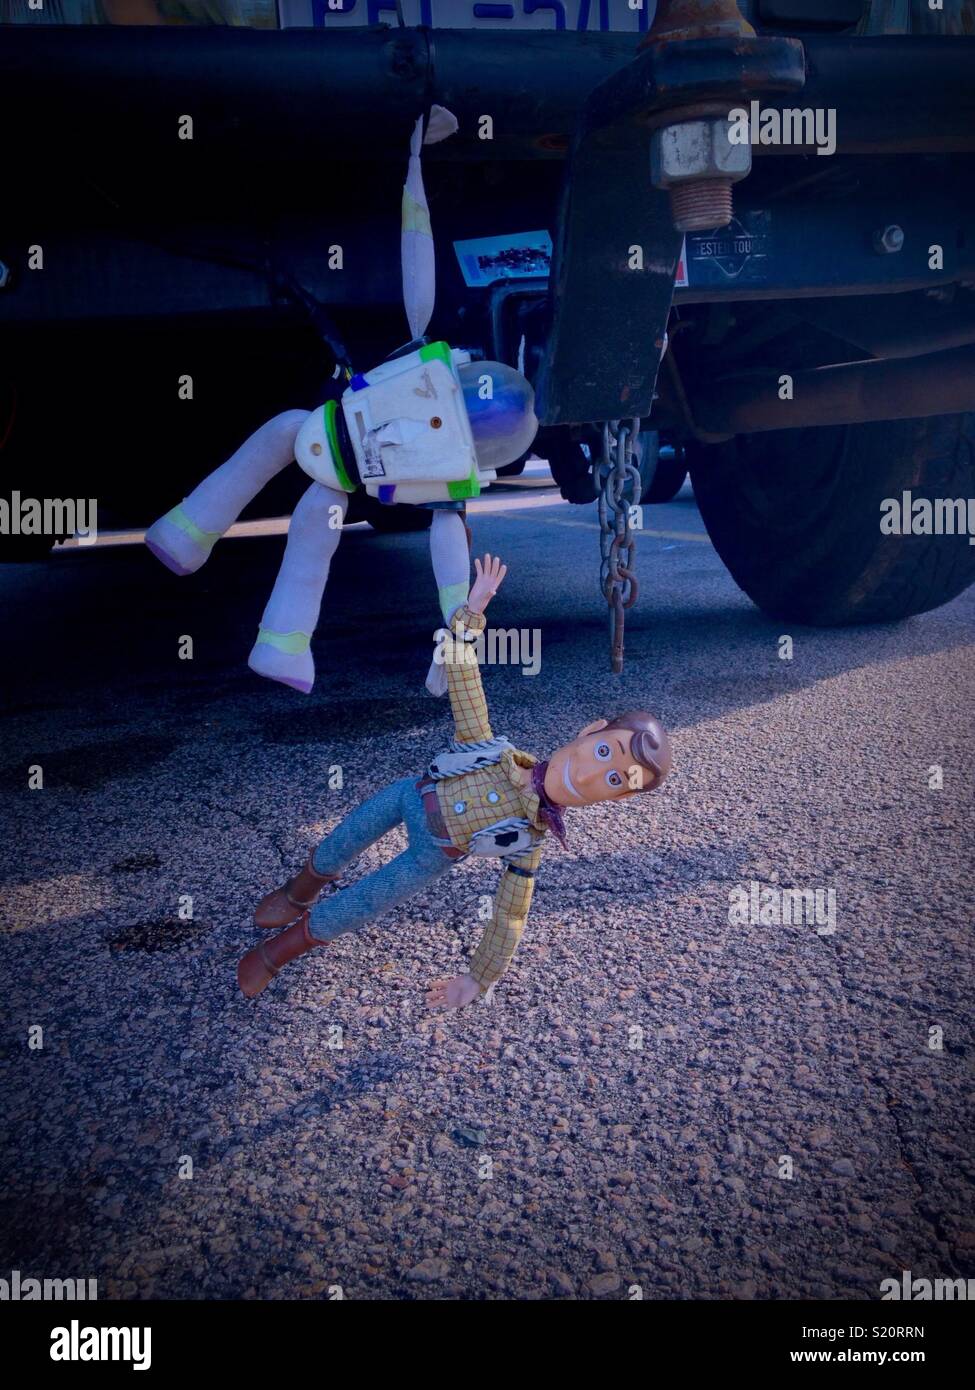 Woody and Buzz toys from Toy Story movies "cling" to car bumper in North  Carolina parking lot Stock Photo - Alamy